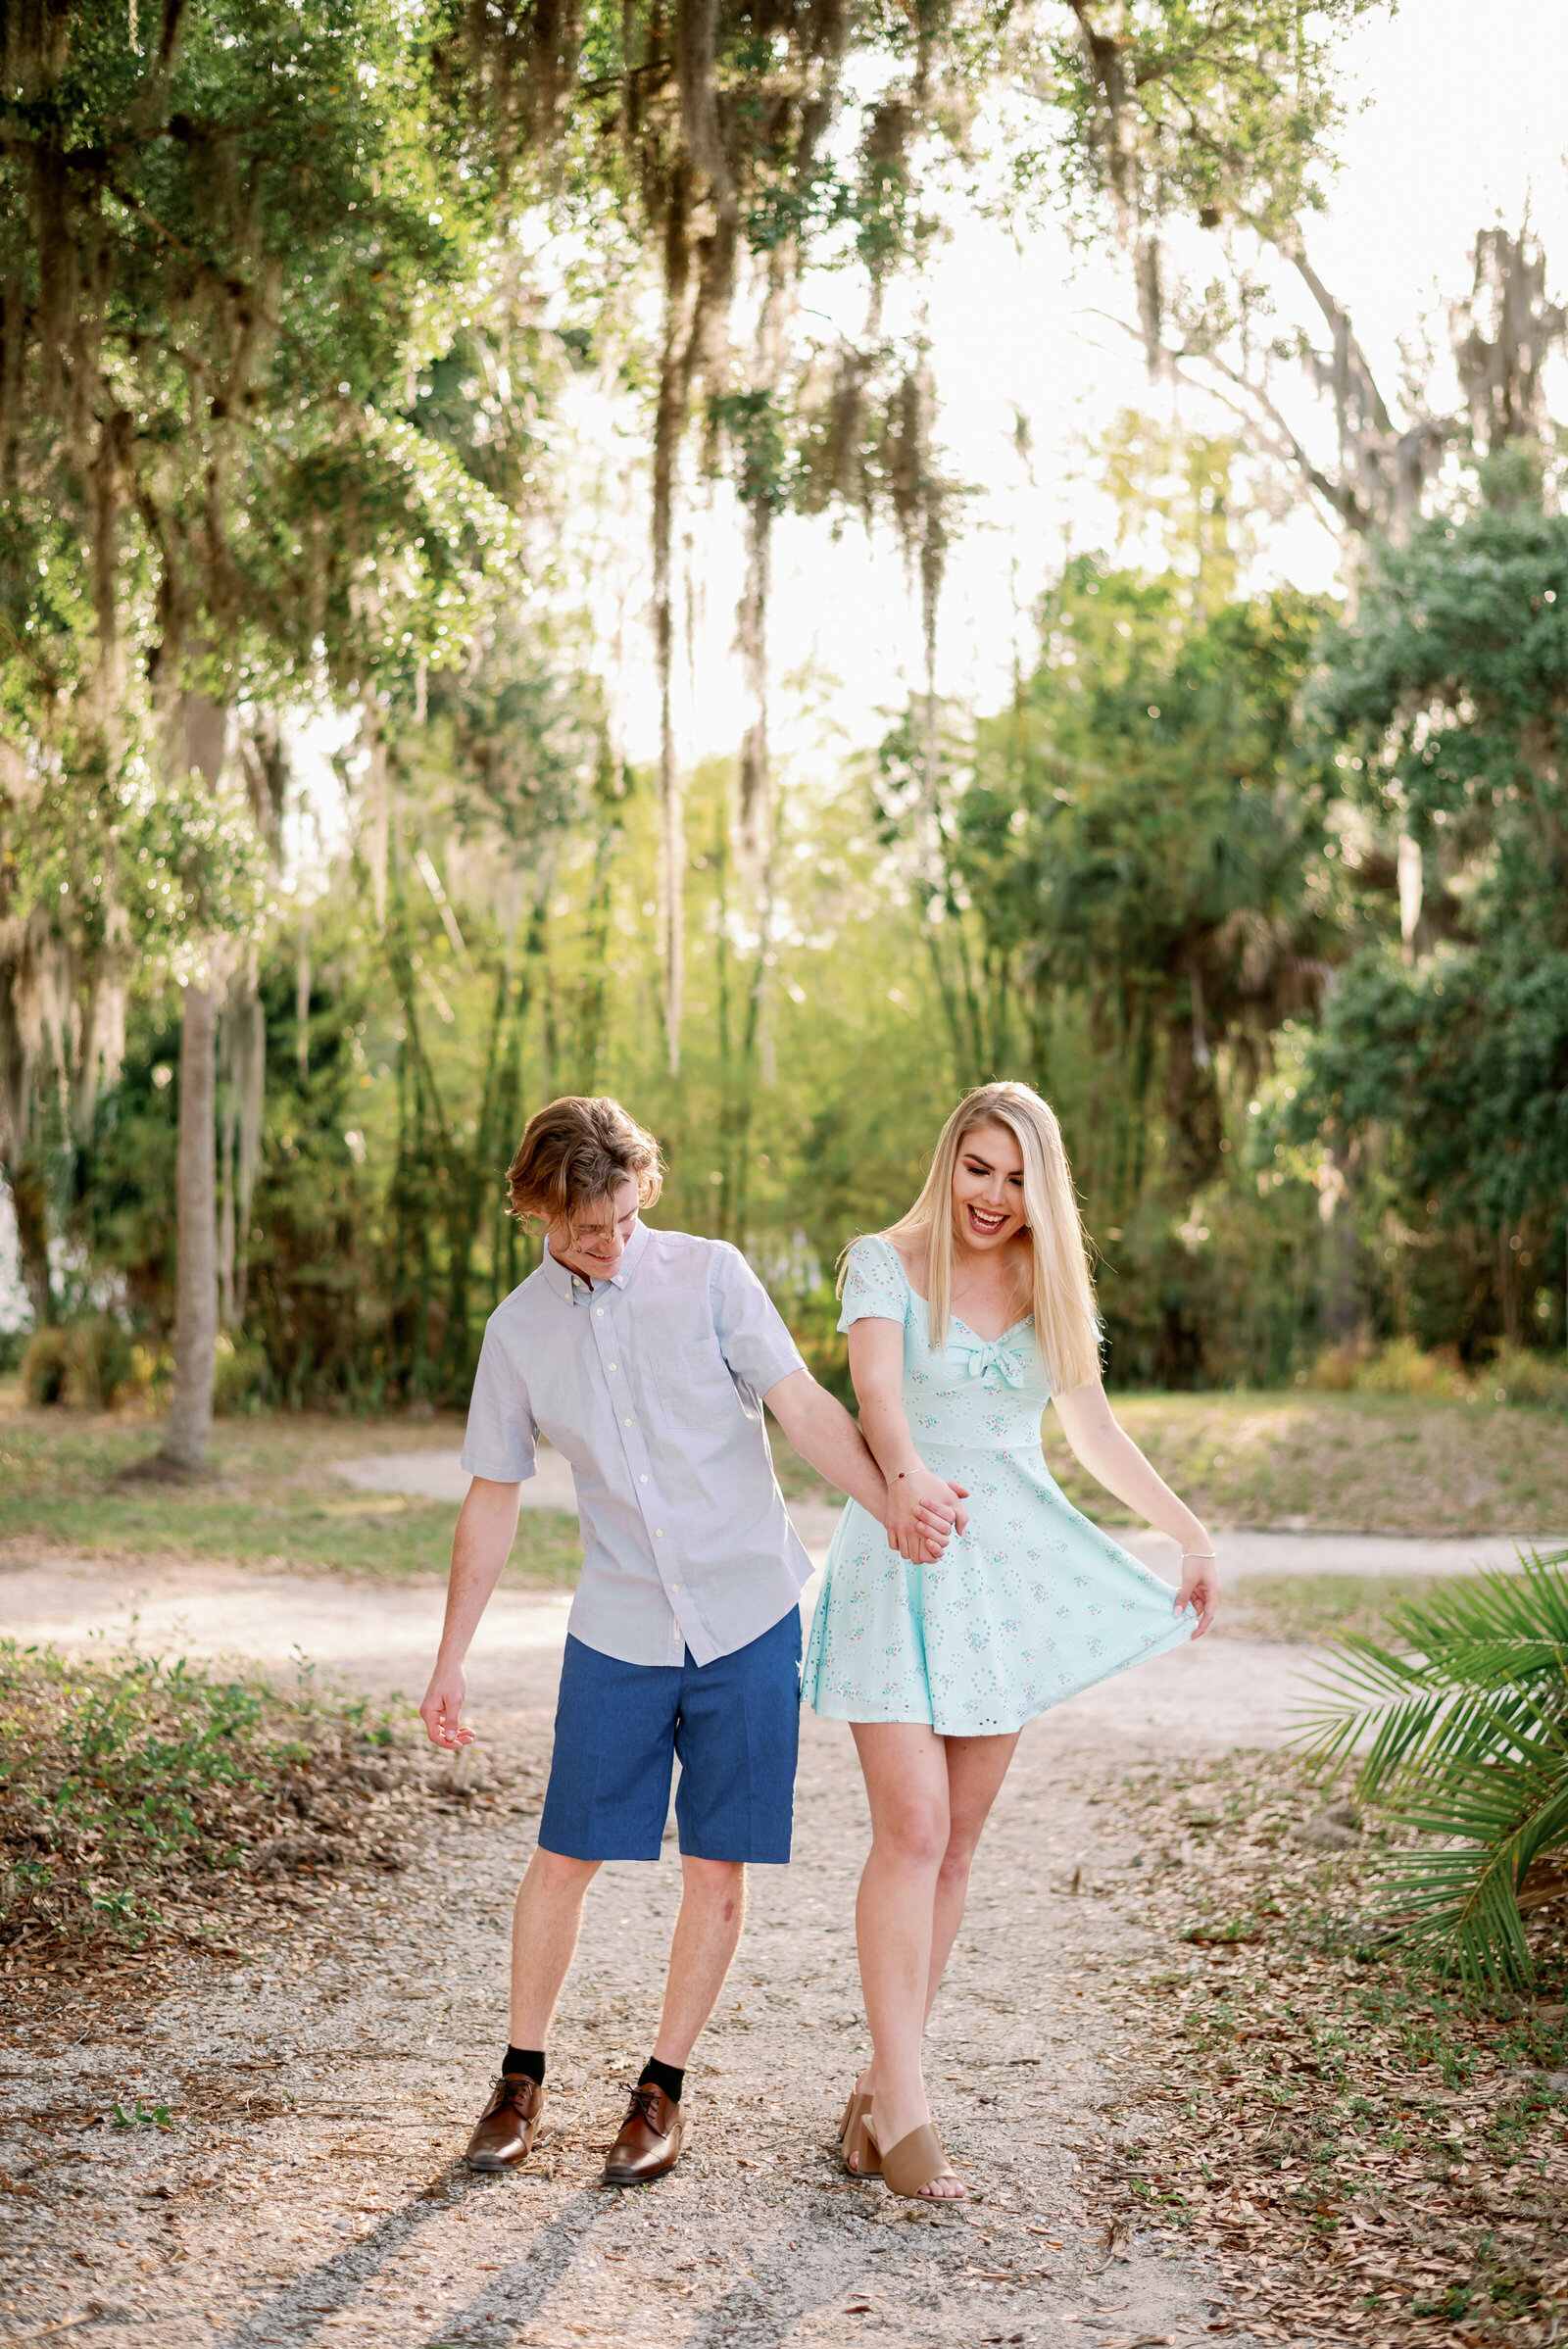 engaged couple wallking down a path toward the camera trying to bump their hips together as they walk. Both are laughing and holding hands